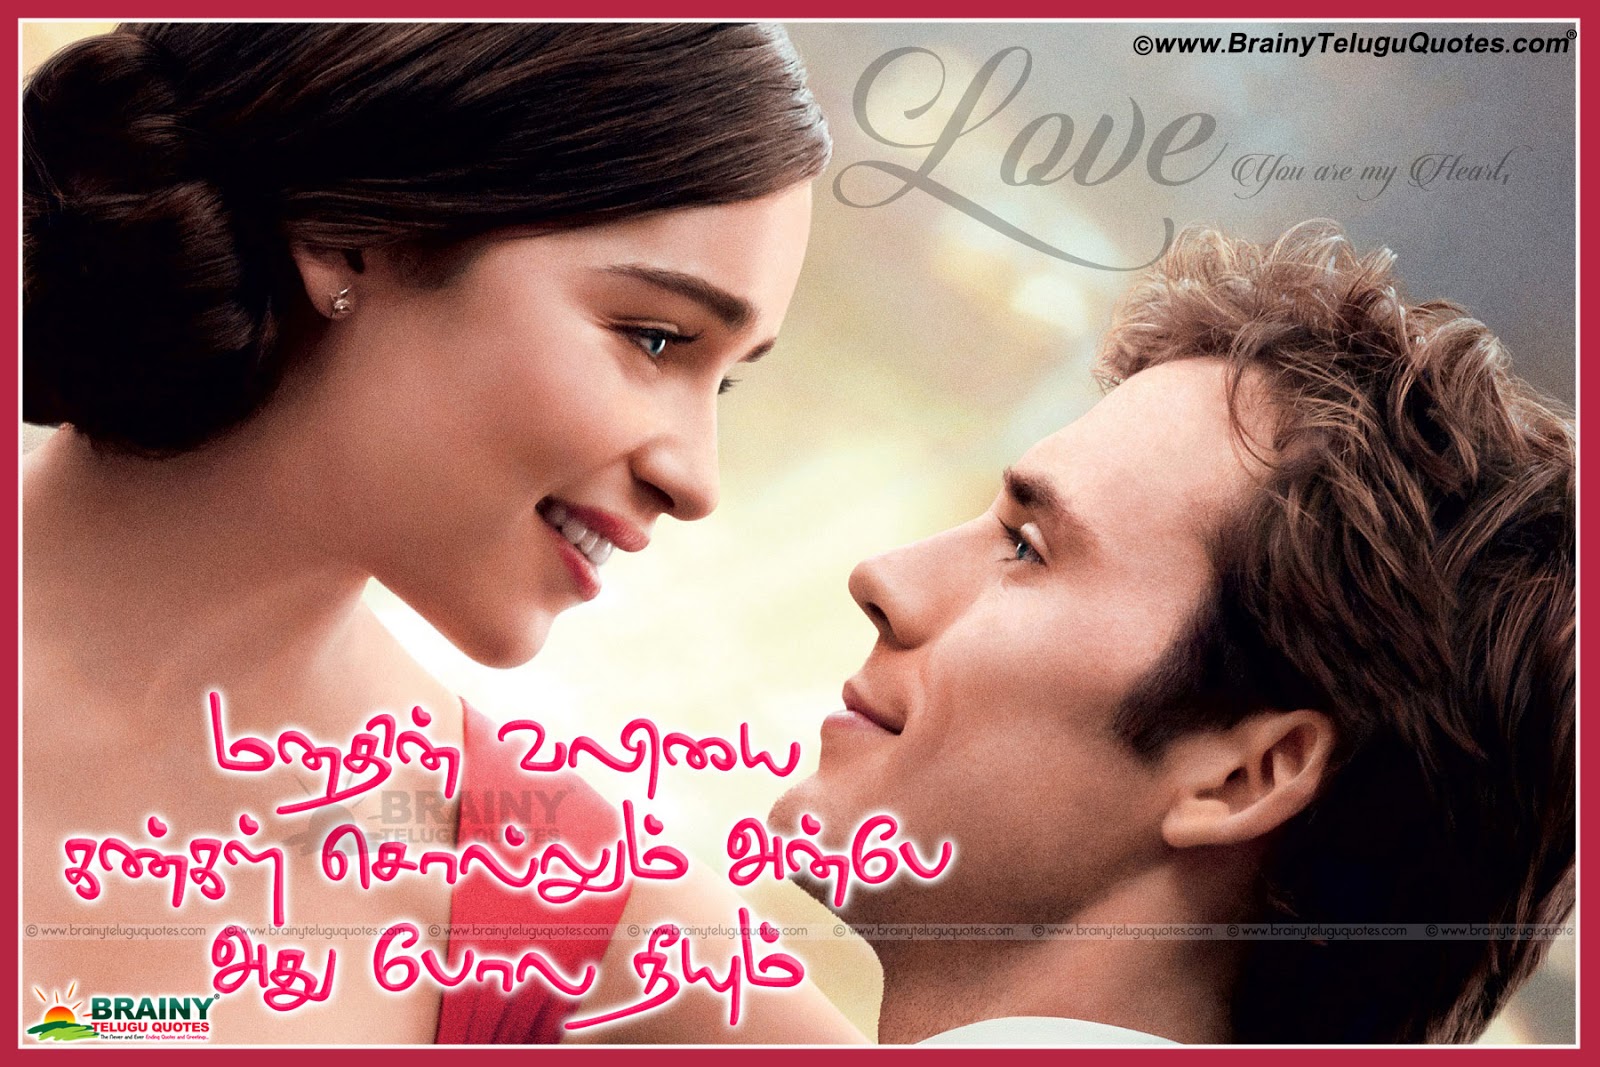 Tamil Poems About Love